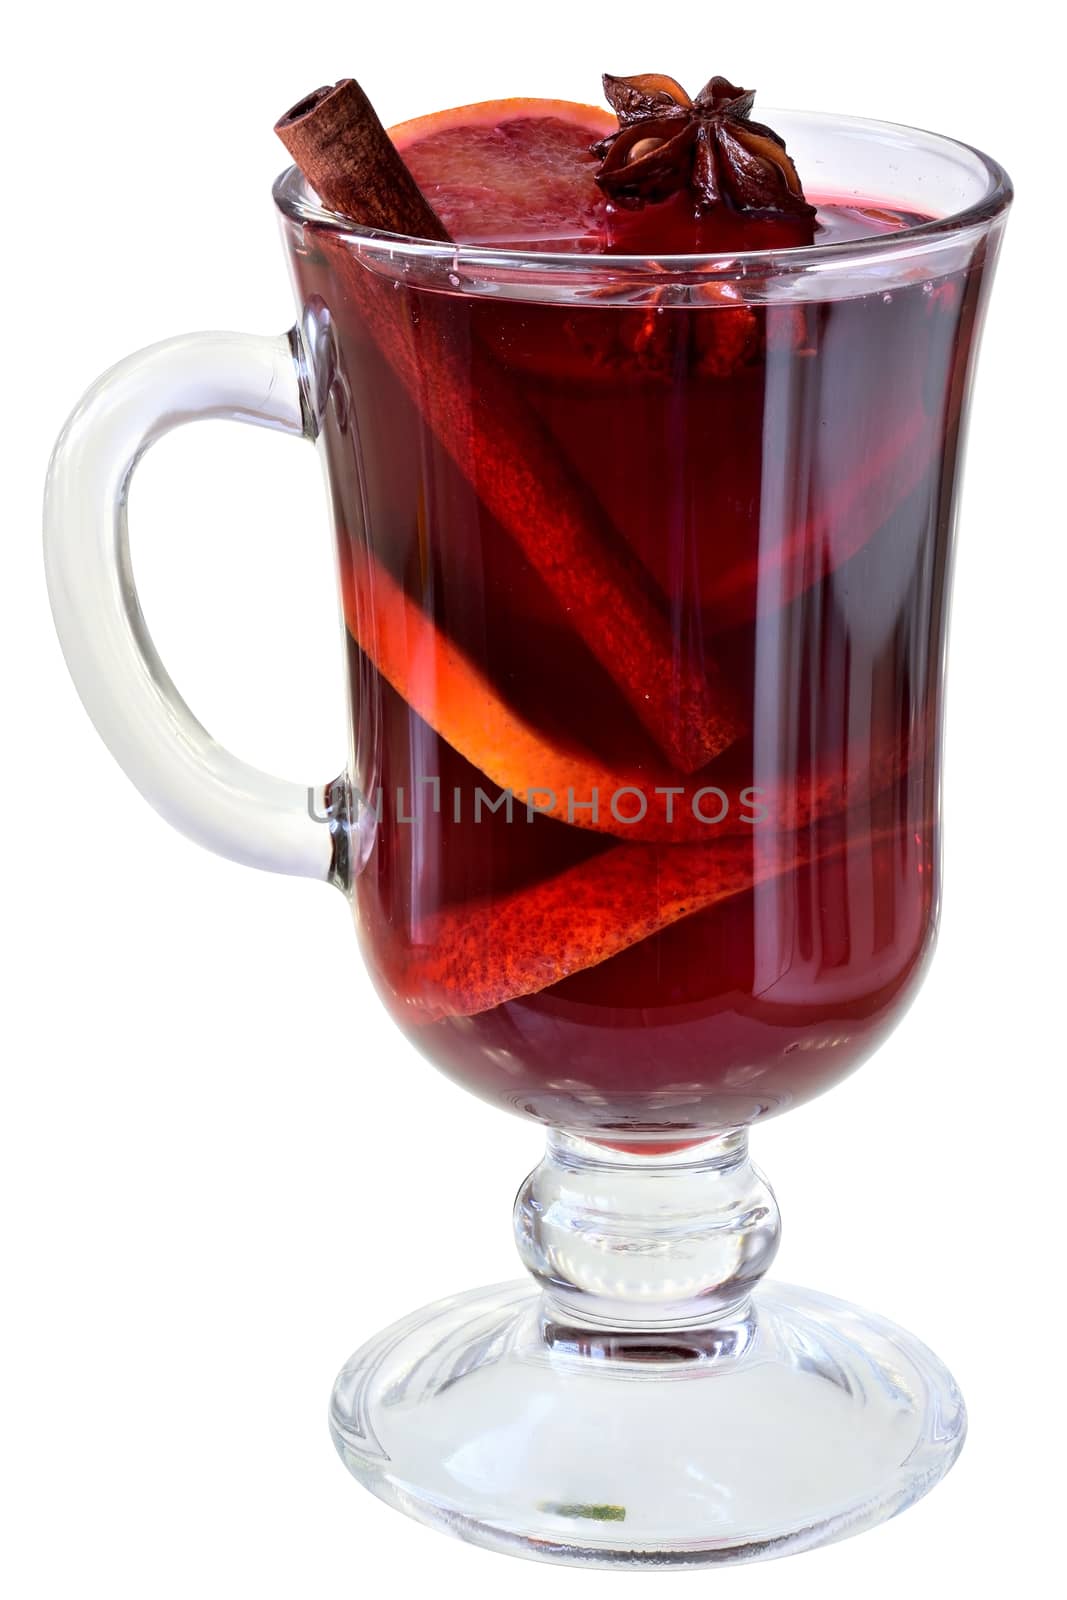 Hot drink mulled red wine with spices and red orange in a glass goblet isolated on white background.